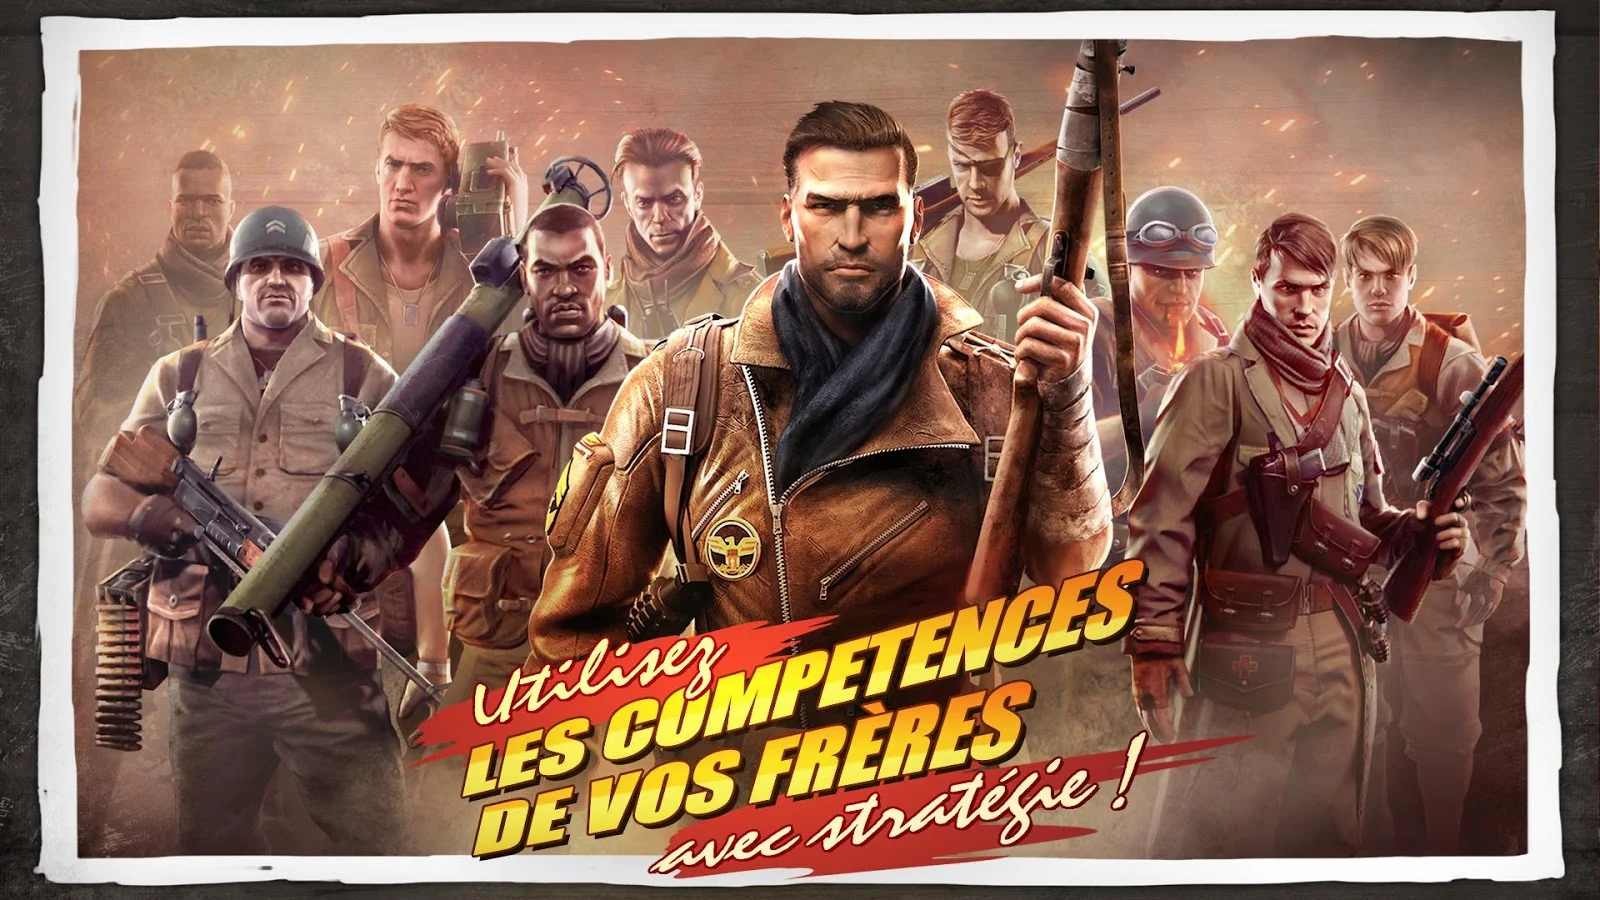   Brothers in Arms® 3 – Capture d'écran 